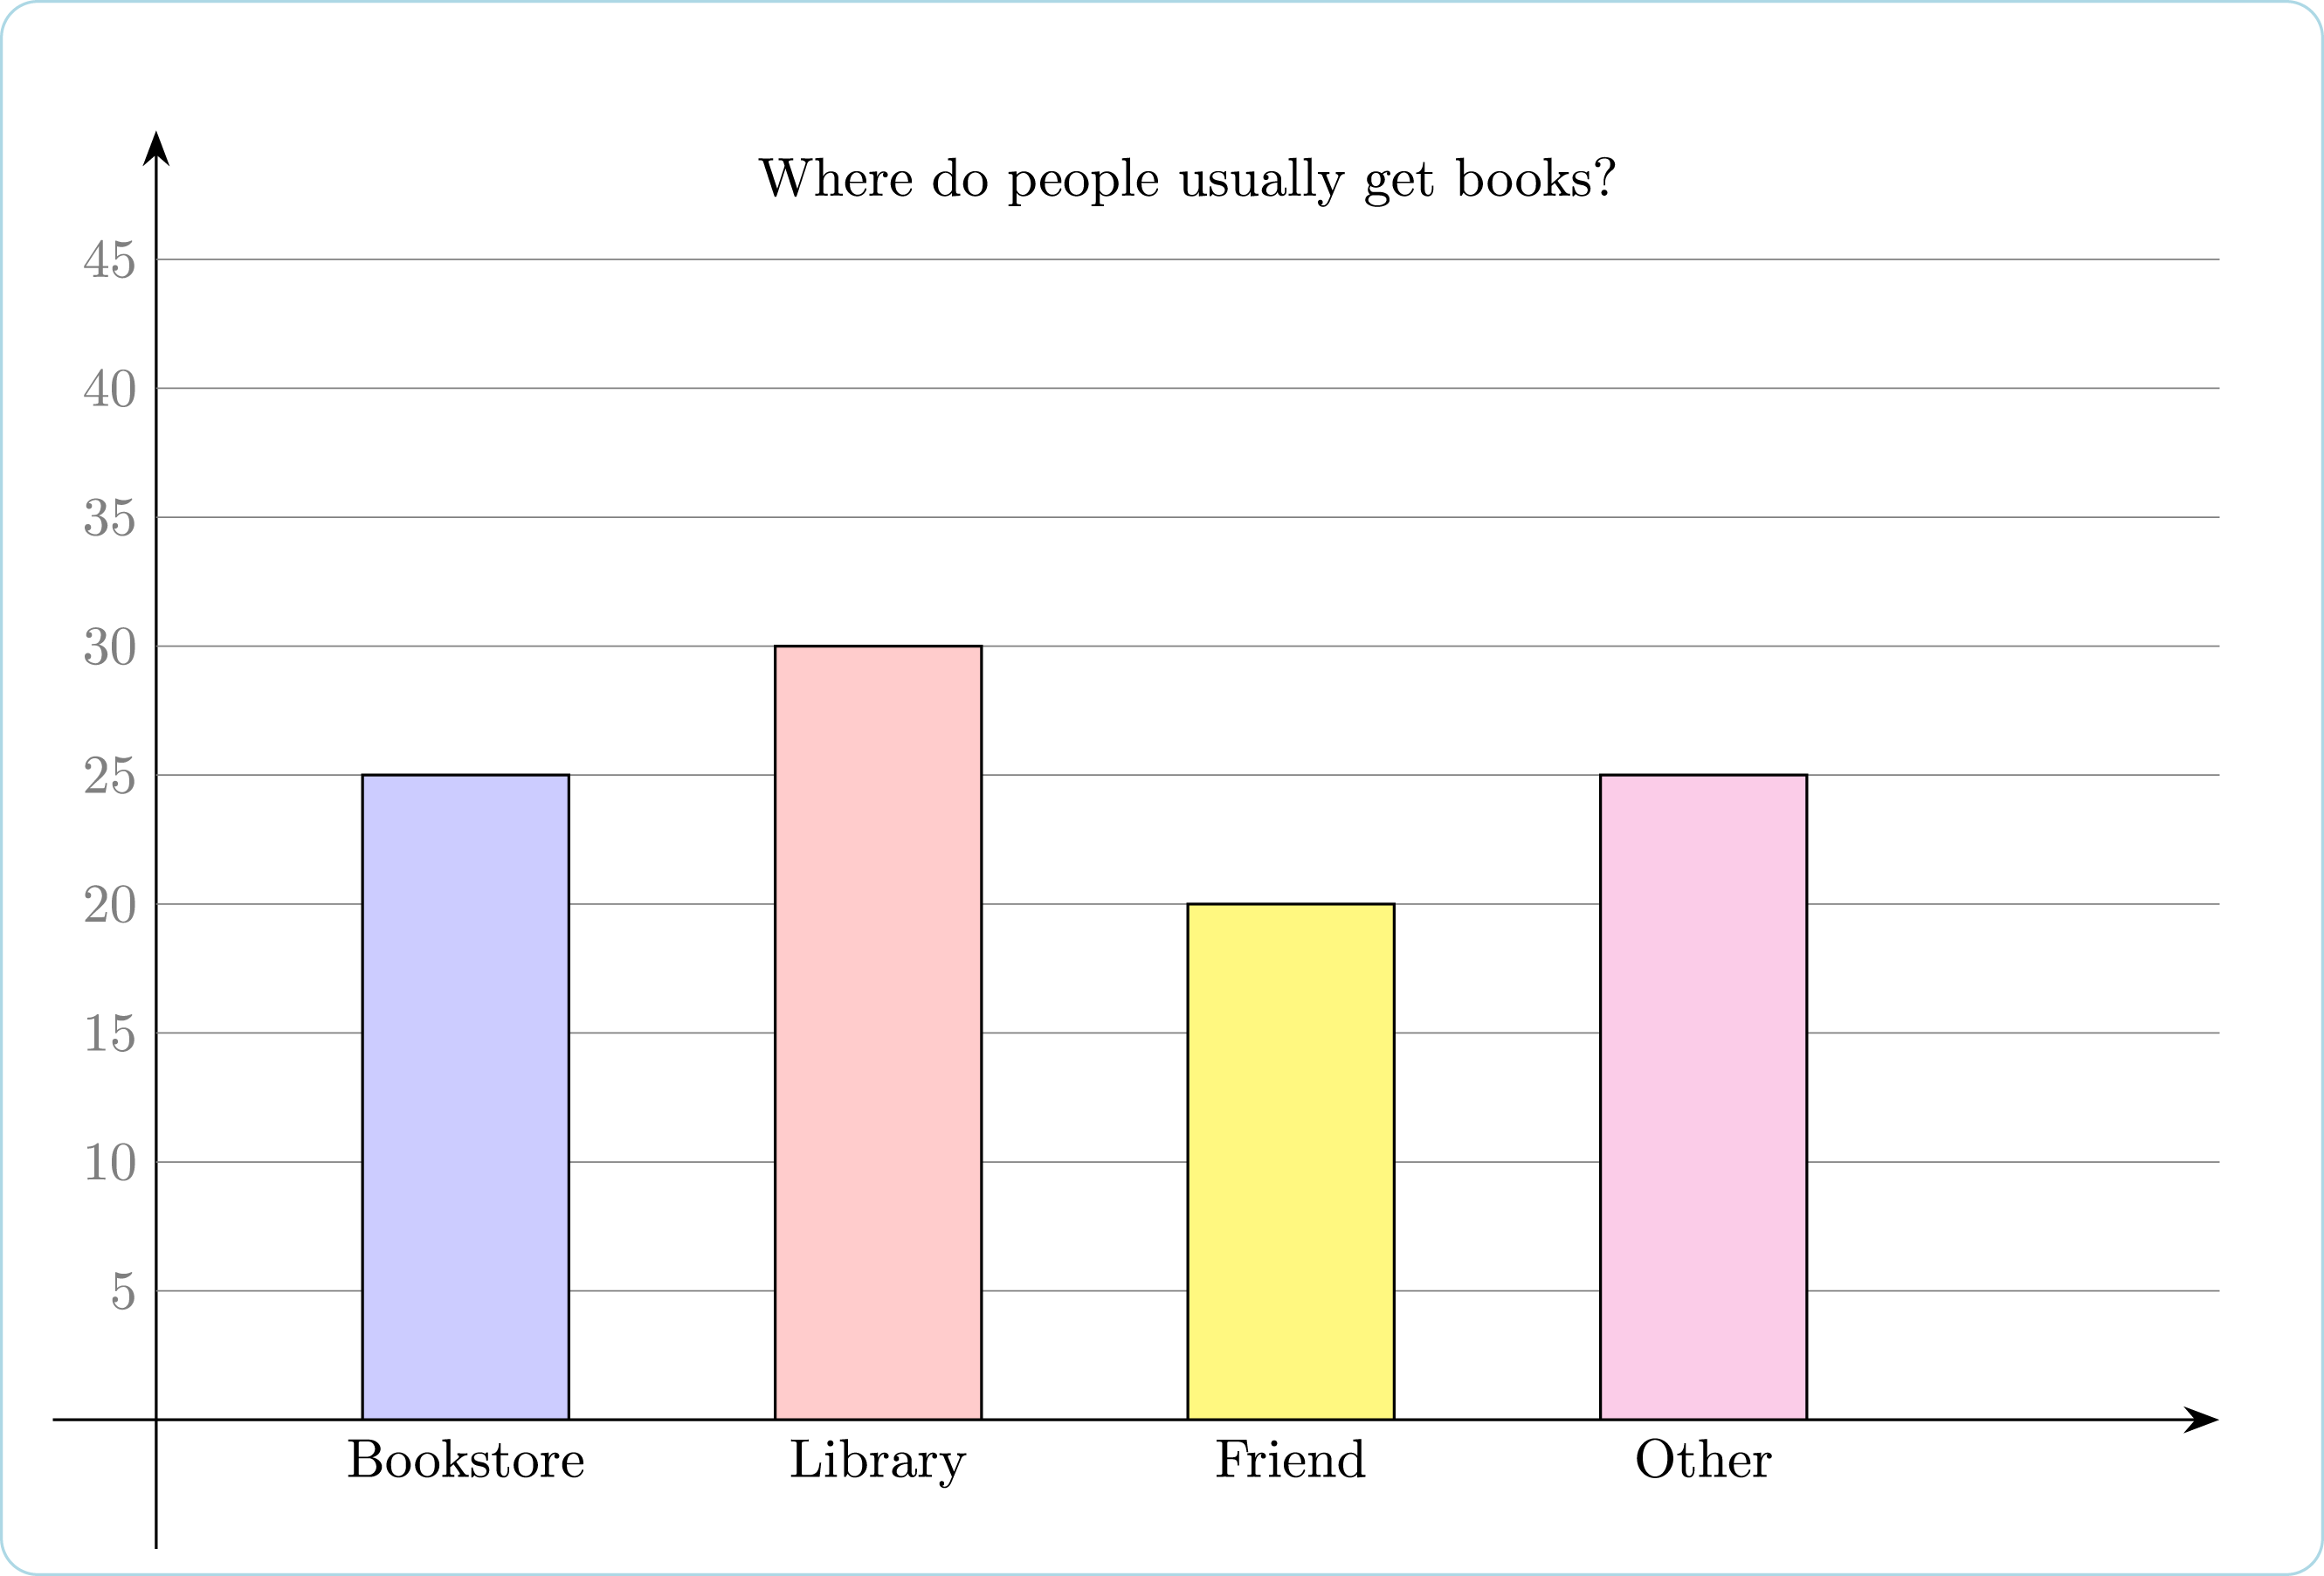 A bar graph titled Where do people usually get books shows 4 bars. The first bar, labelled Bookstore, has height 25. The second bar, labelled Library, has height 30. The third bar is labelled Friends with height 20 and the last, labelled Other, has height 25.